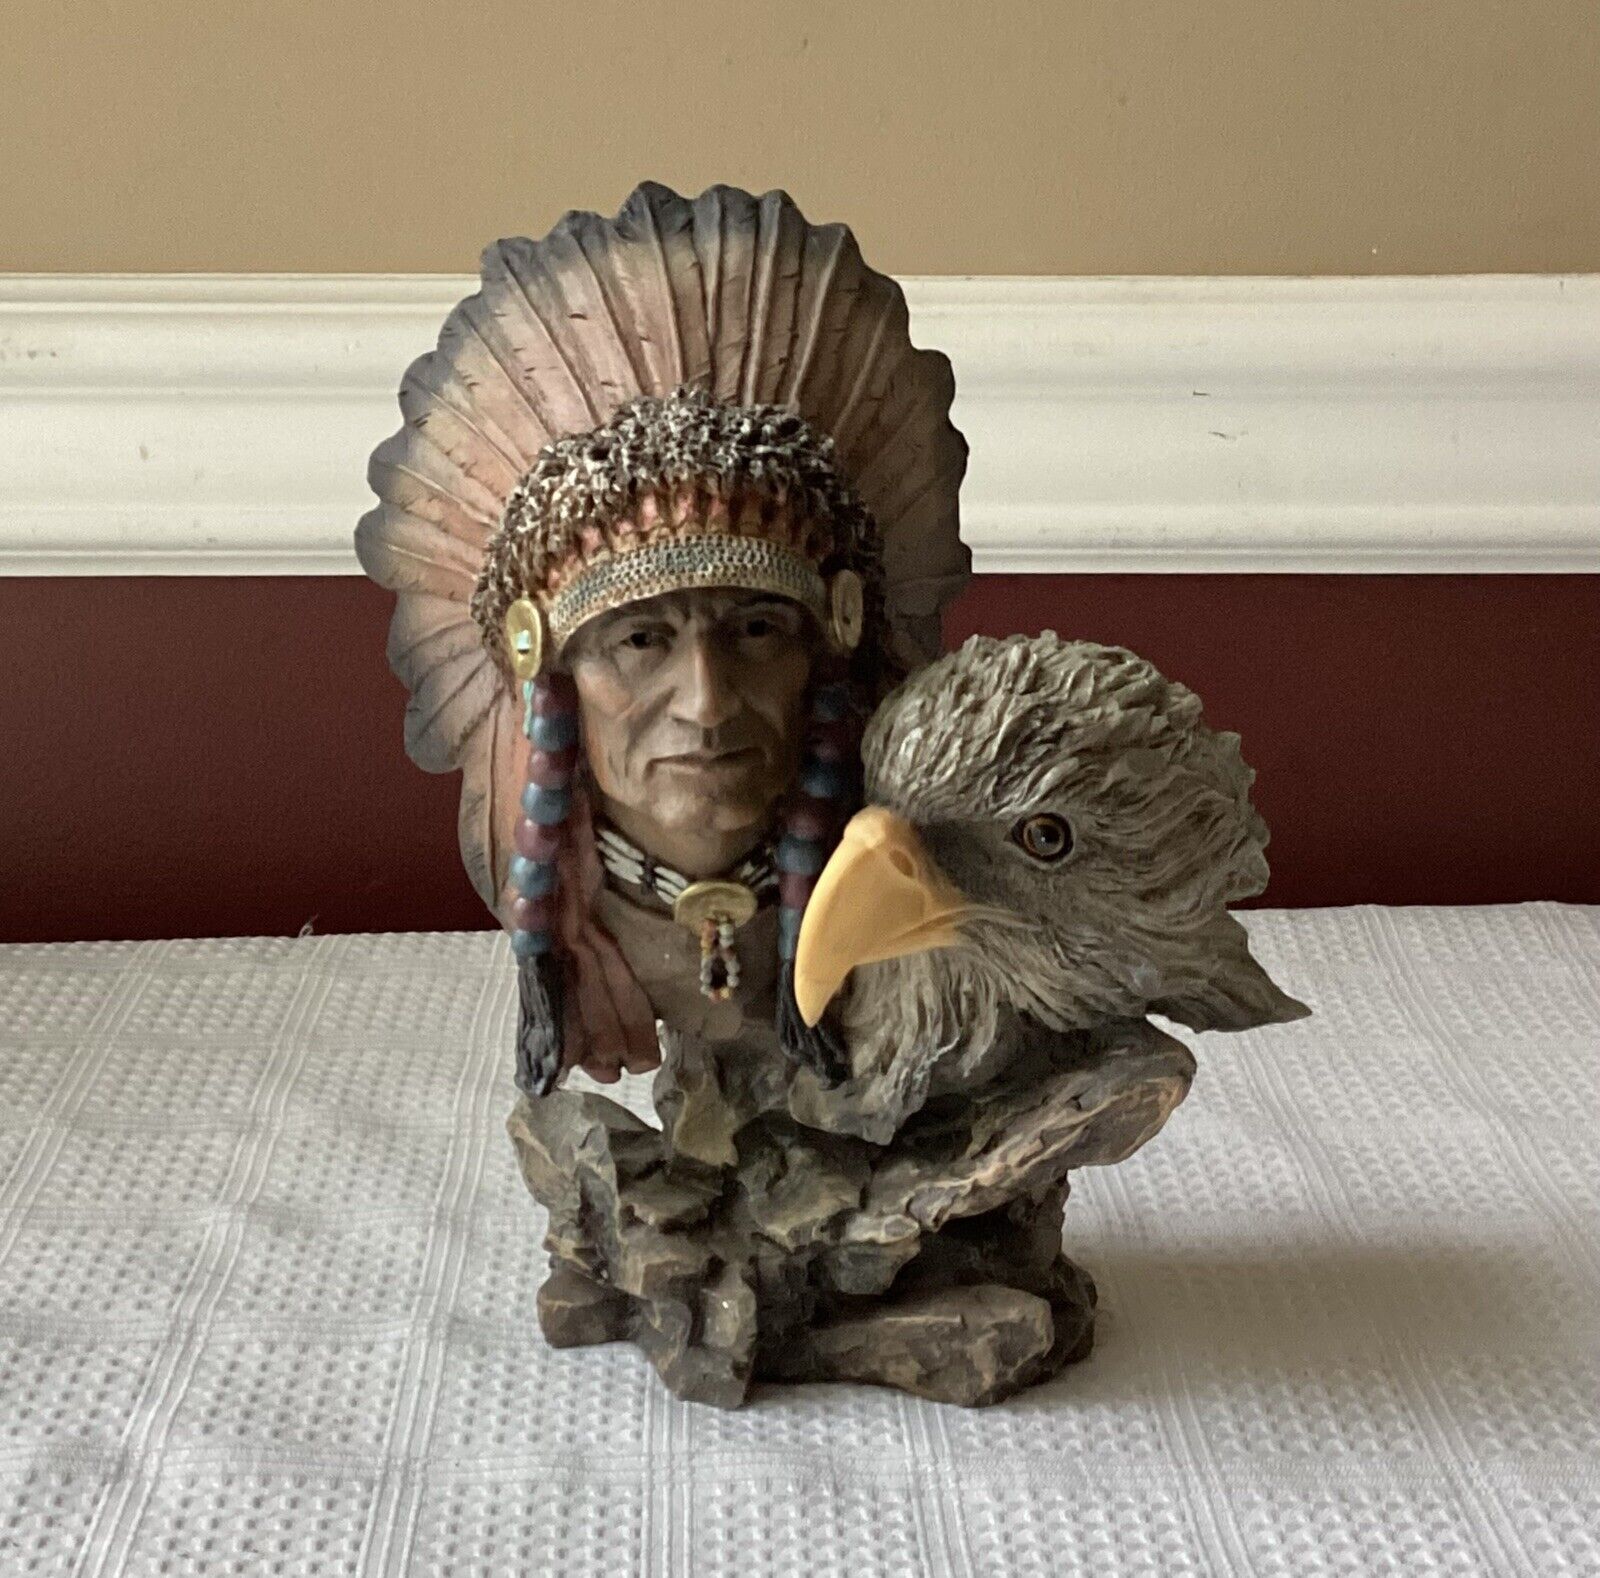 VTG Native American Style Figurine, Native Indian Chief W. Eagle, Marked MRH, 8